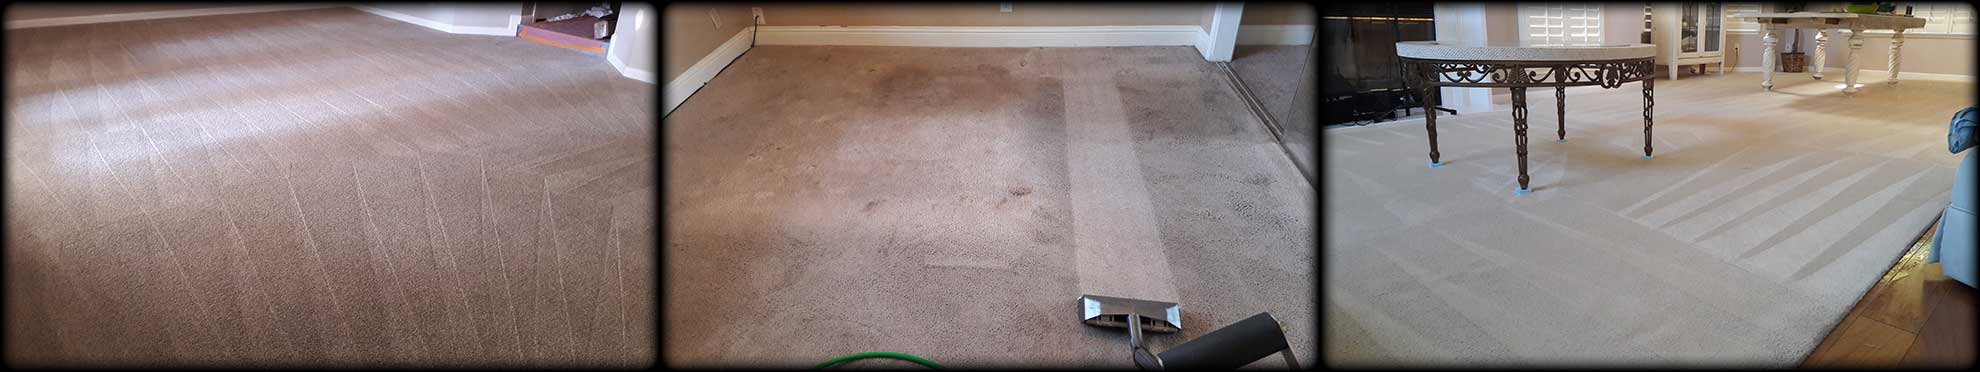 The Best Carpet Cleaning Company El Dorado Hills Ca 5 Star Rated